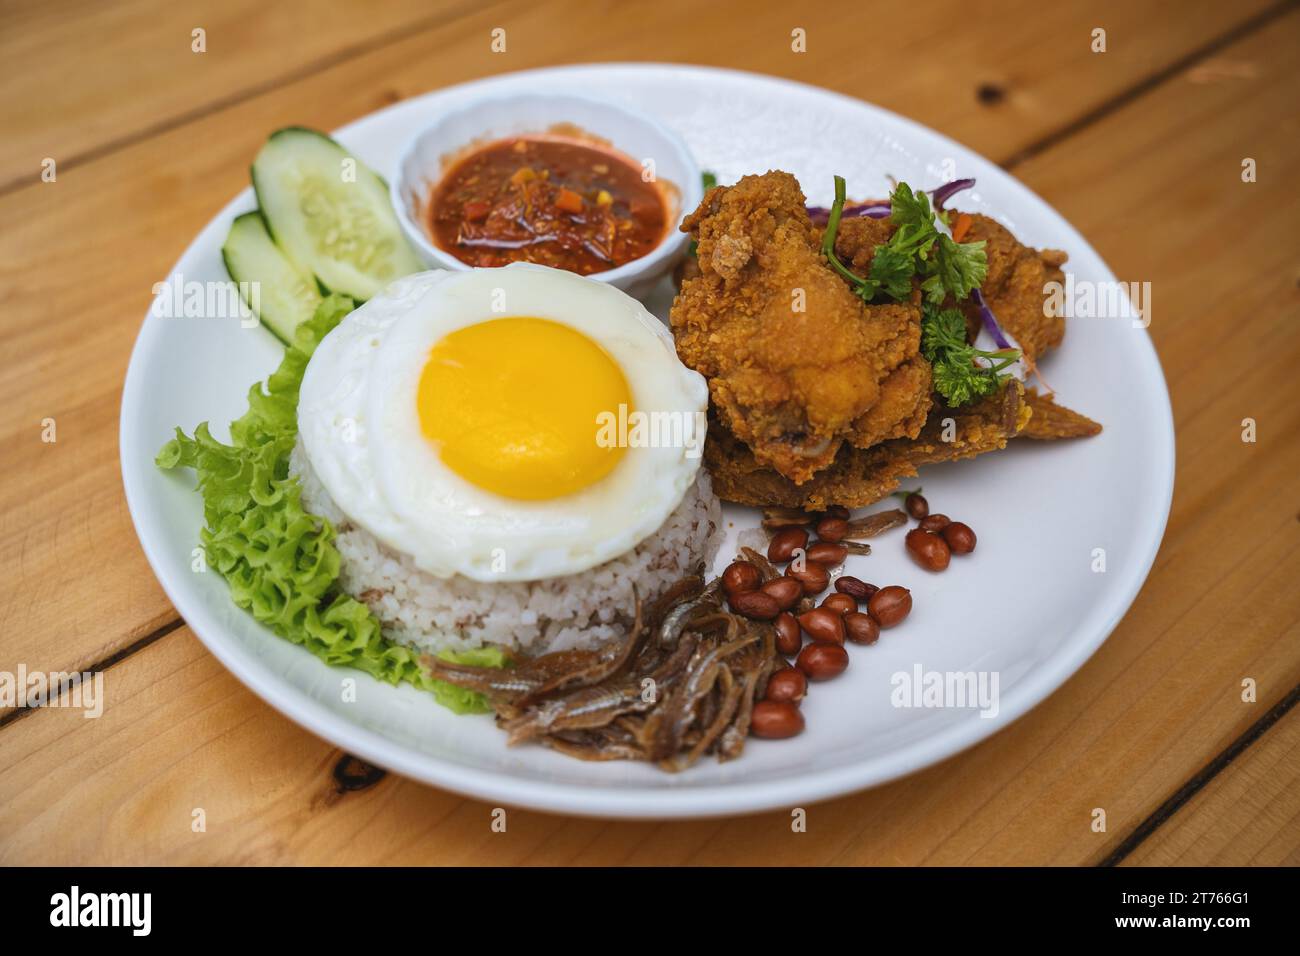 Nasi Lemak with Fried Chicken and Egg on White Plate with Cucumber Stock Photo